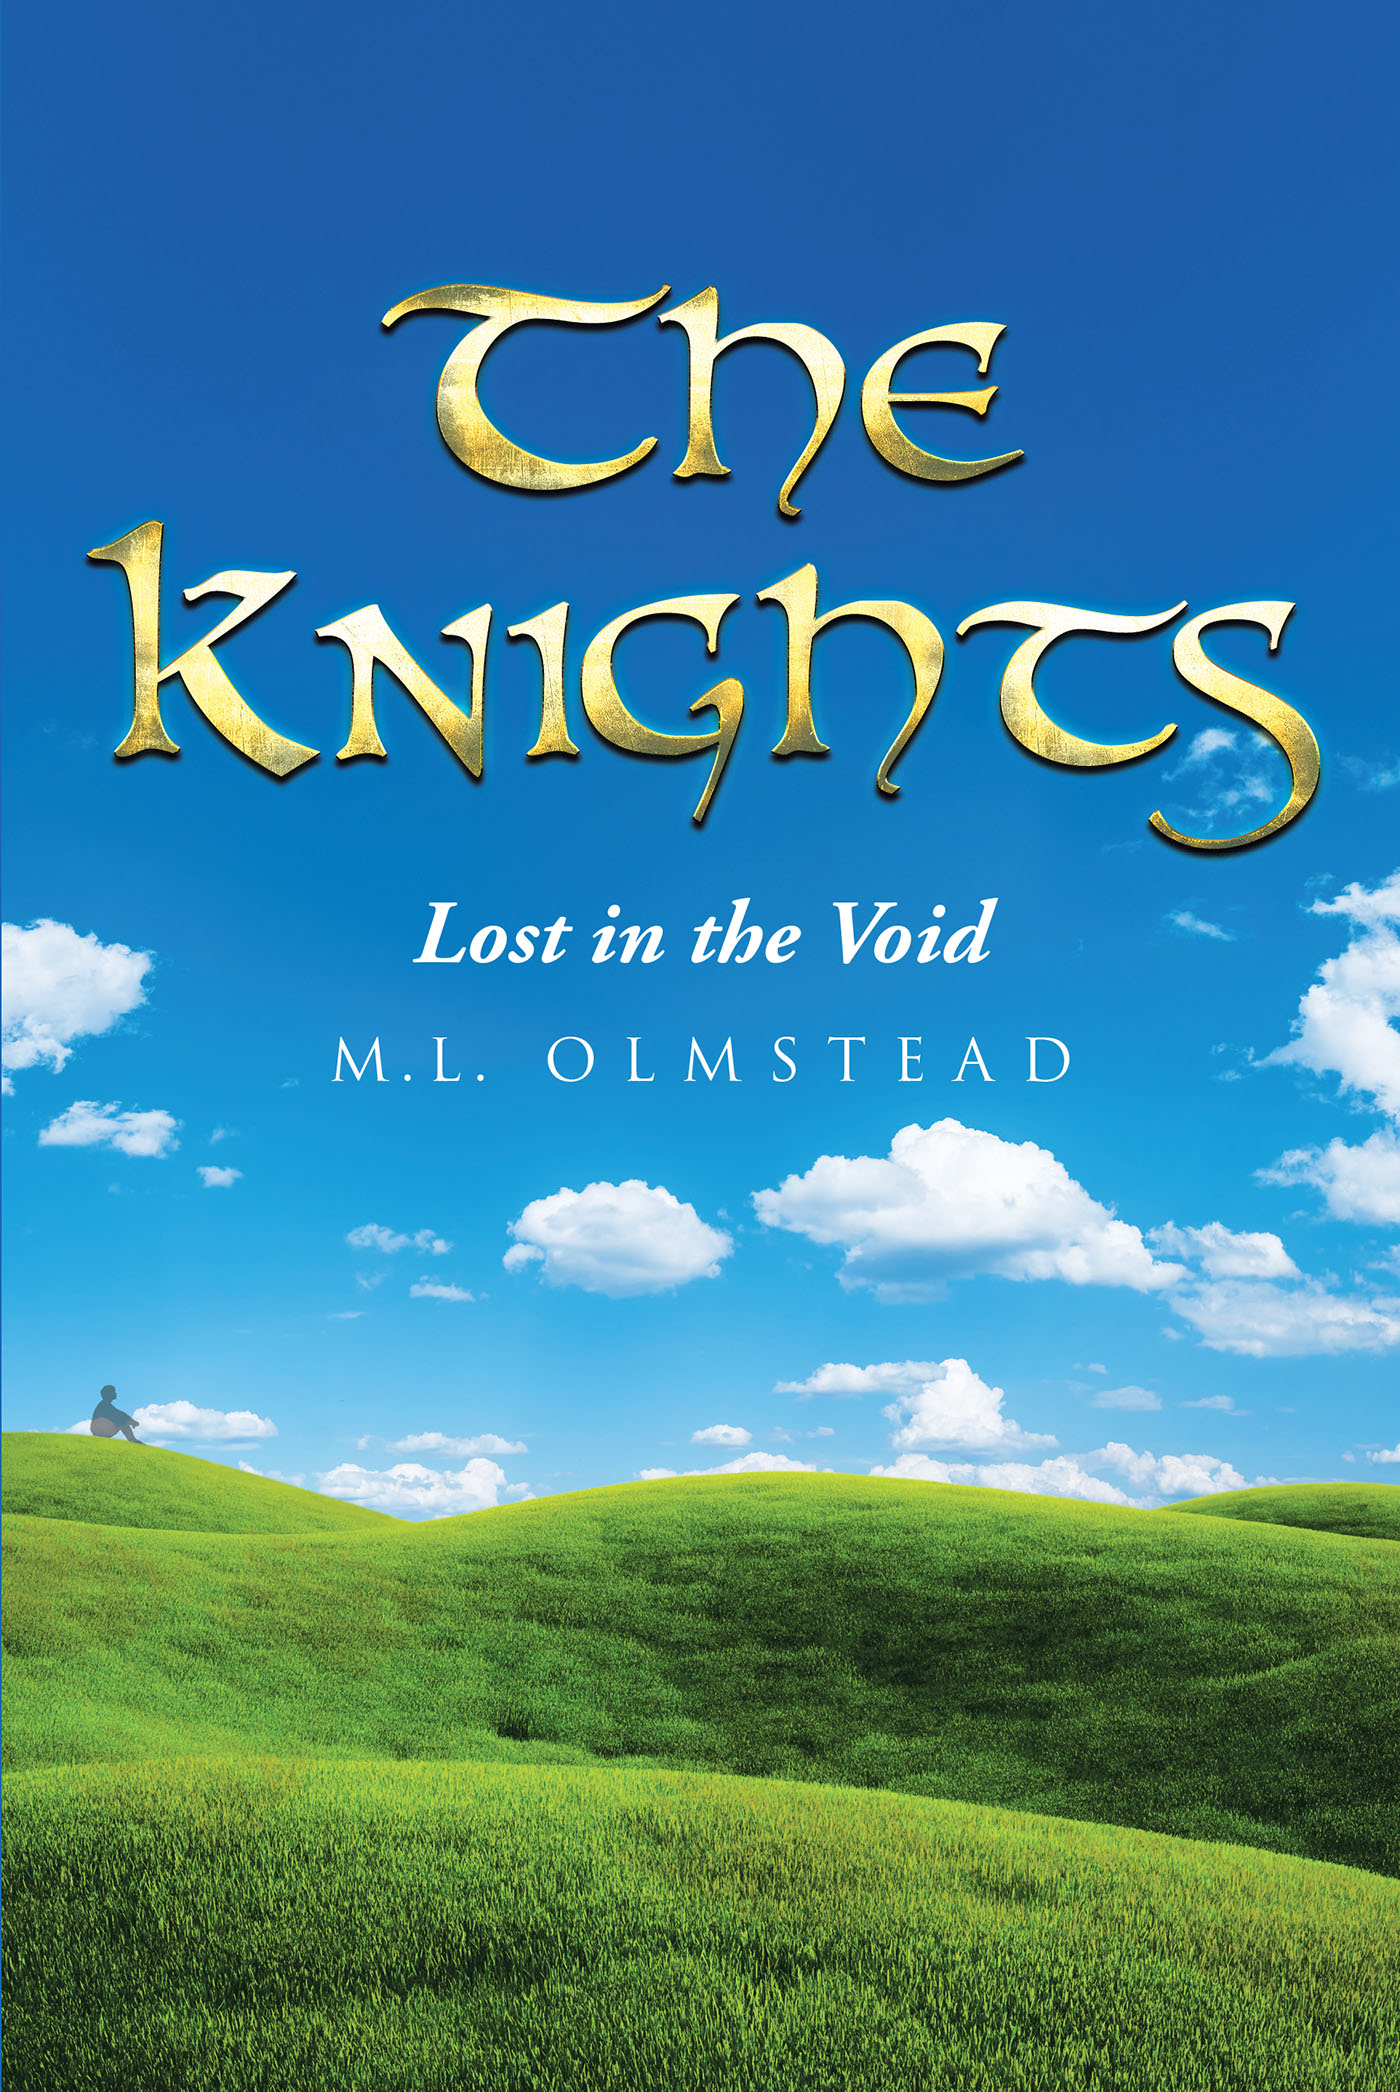 Author M.L. Olmstead’s New Book, "The Knights: Lost in the Void" Tells the Story of Three Strangers Who Awaken in a New Land and Must Save It in Order to Go Back Home